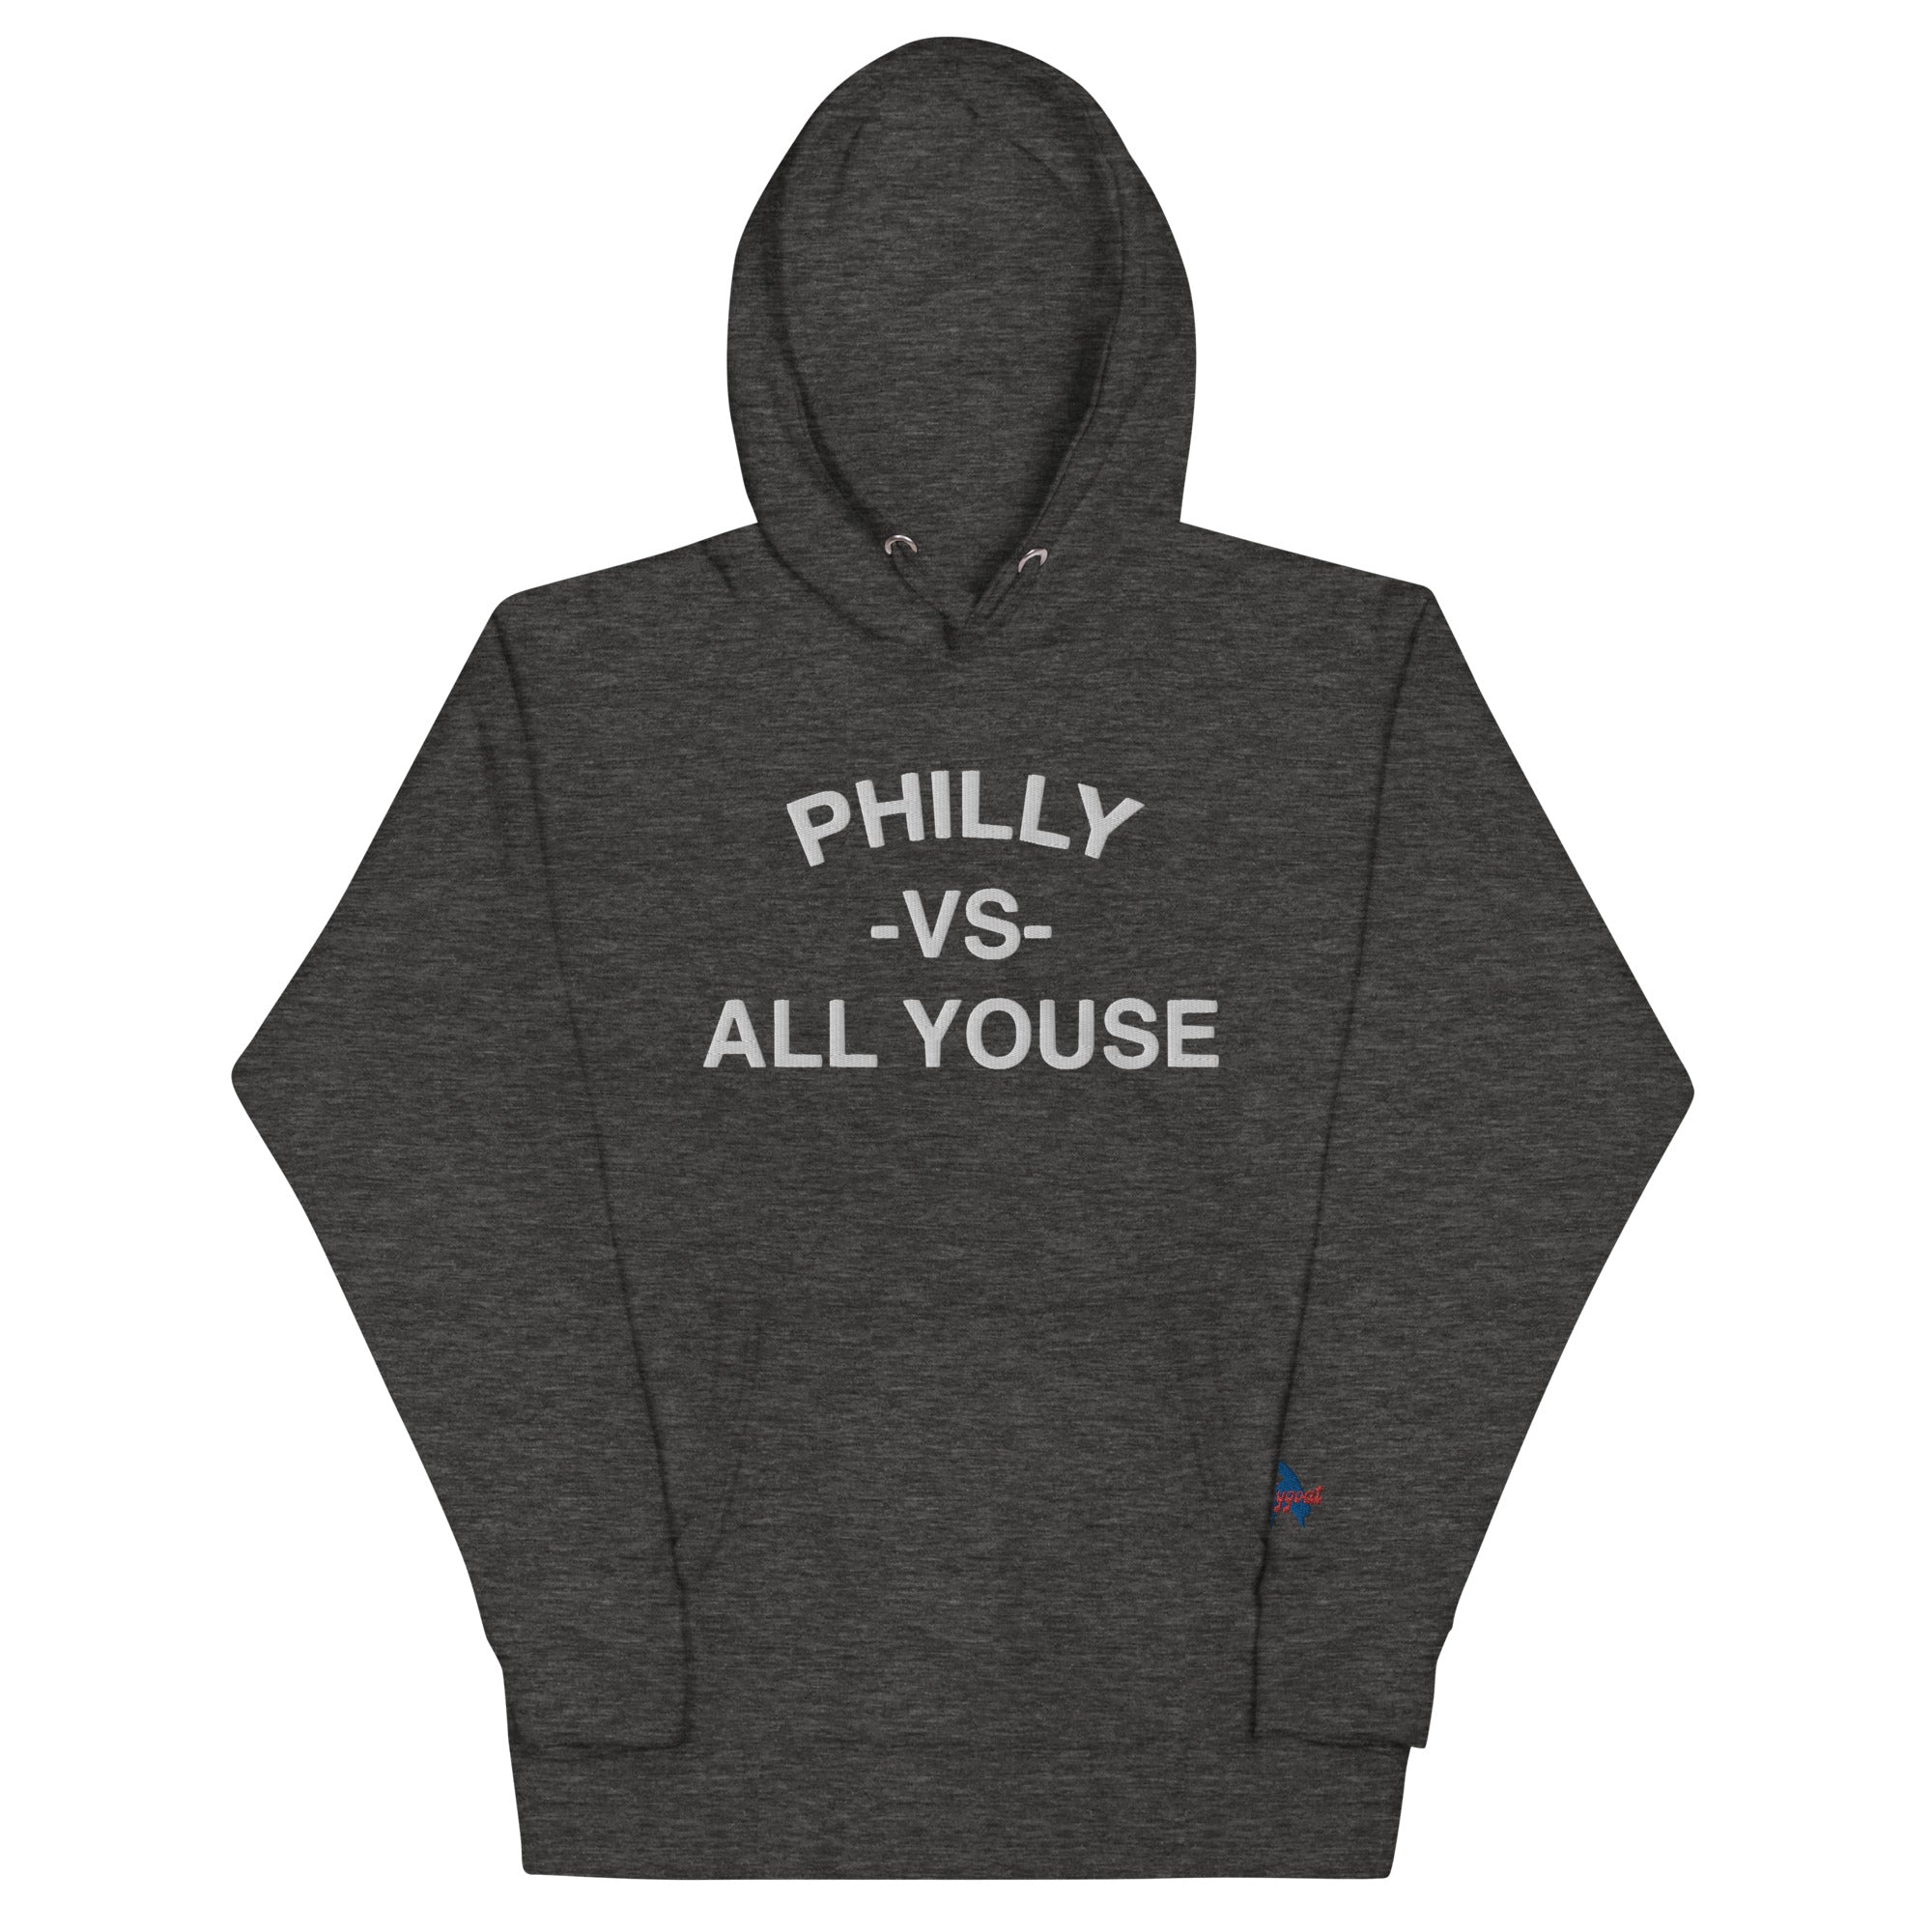 "Philly vs. All Youse" Embroidered Hoodie